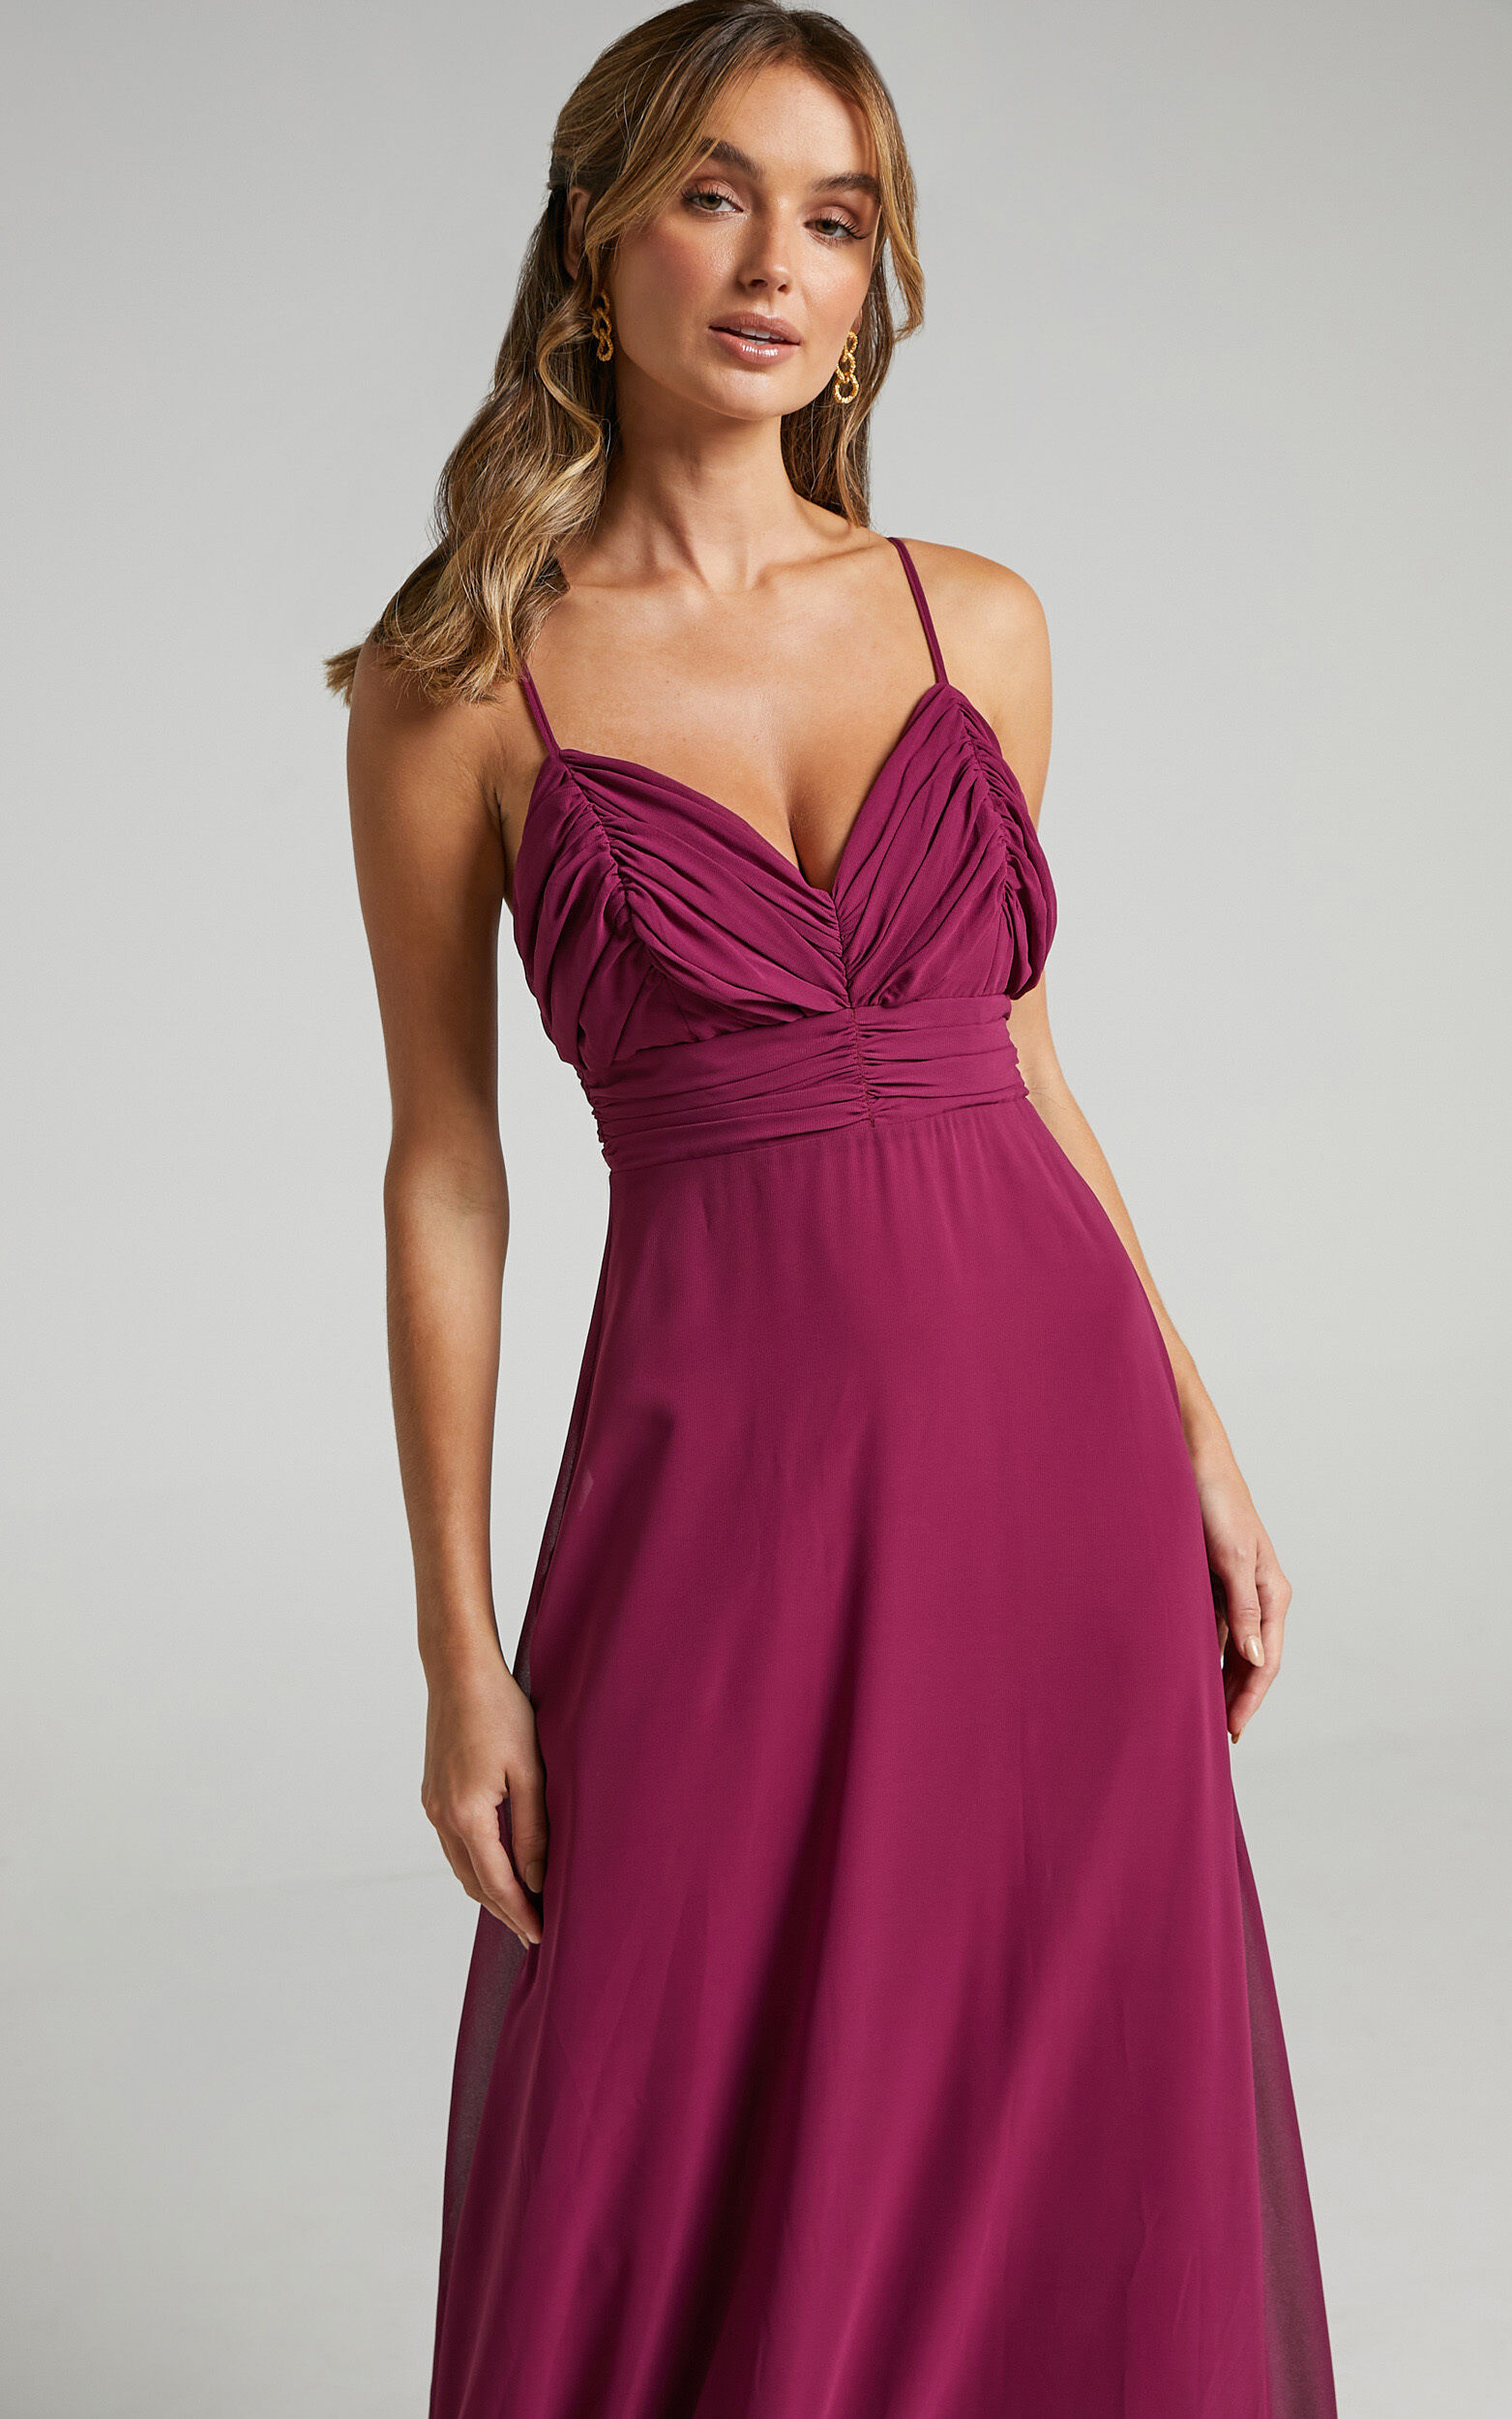 Just One Dance Dress in Mulberry - 06, PRP2, super-hi-res image number null